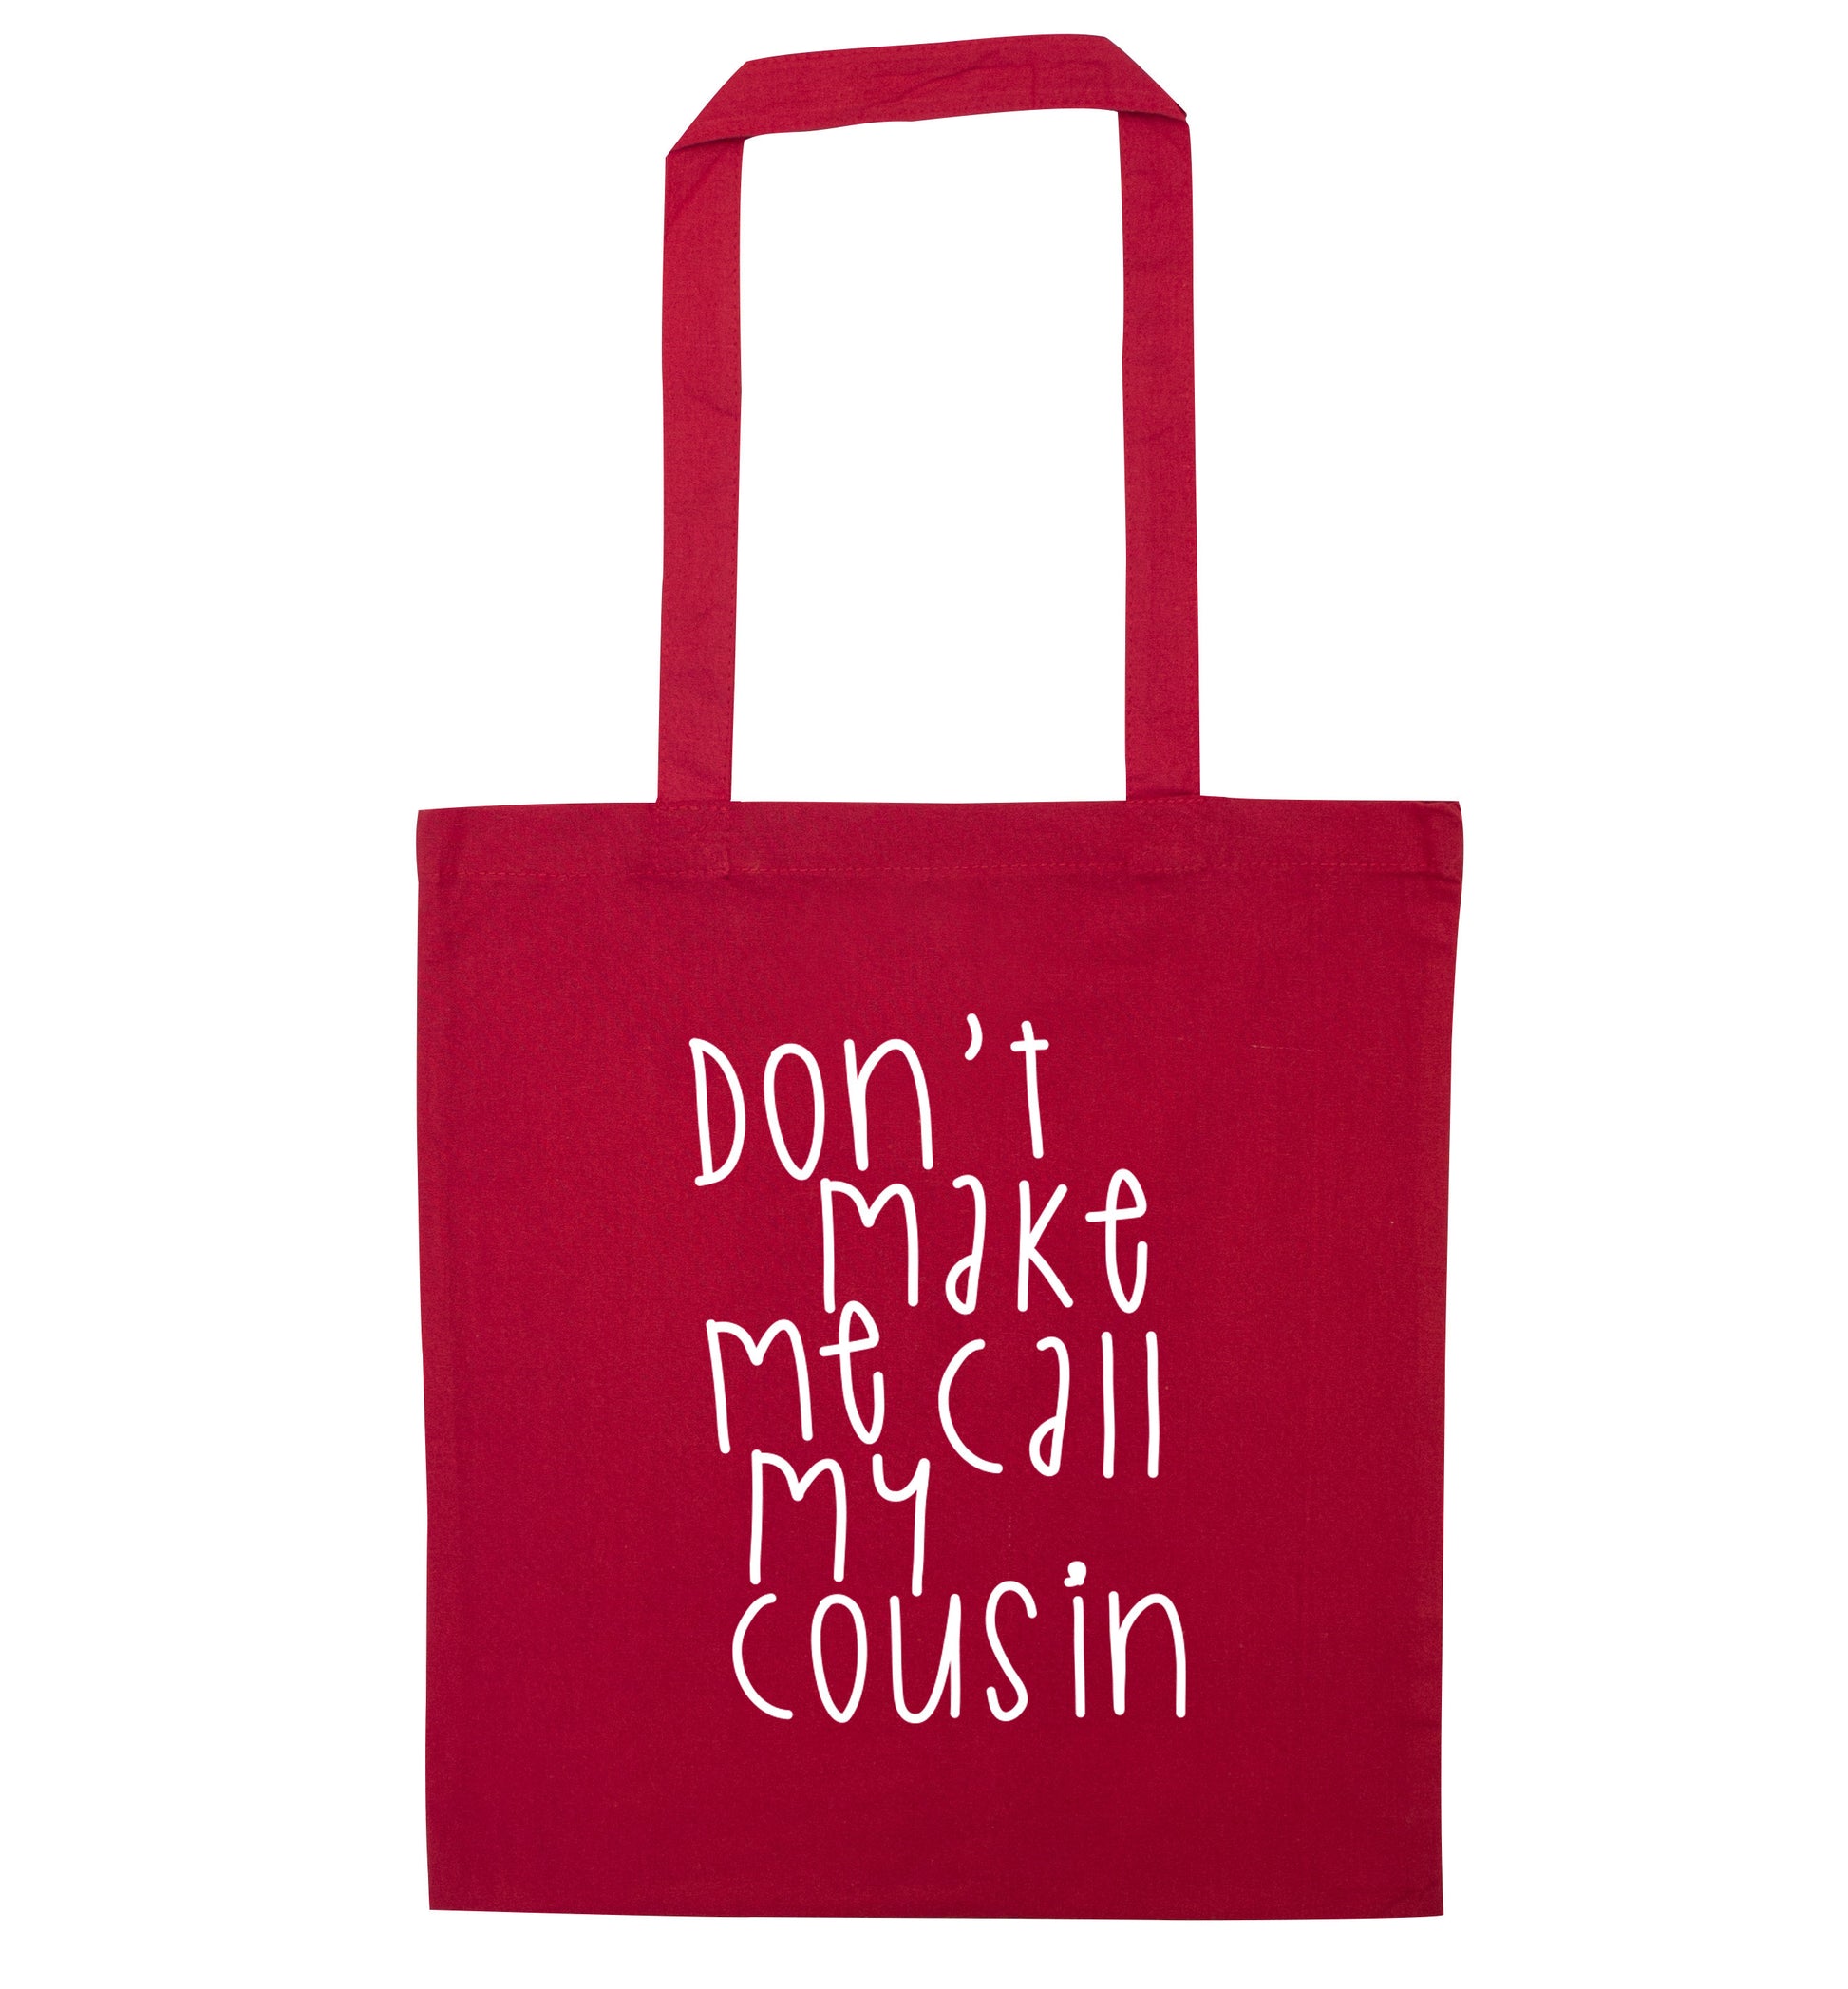 Don't make me call my cousin red tote bag